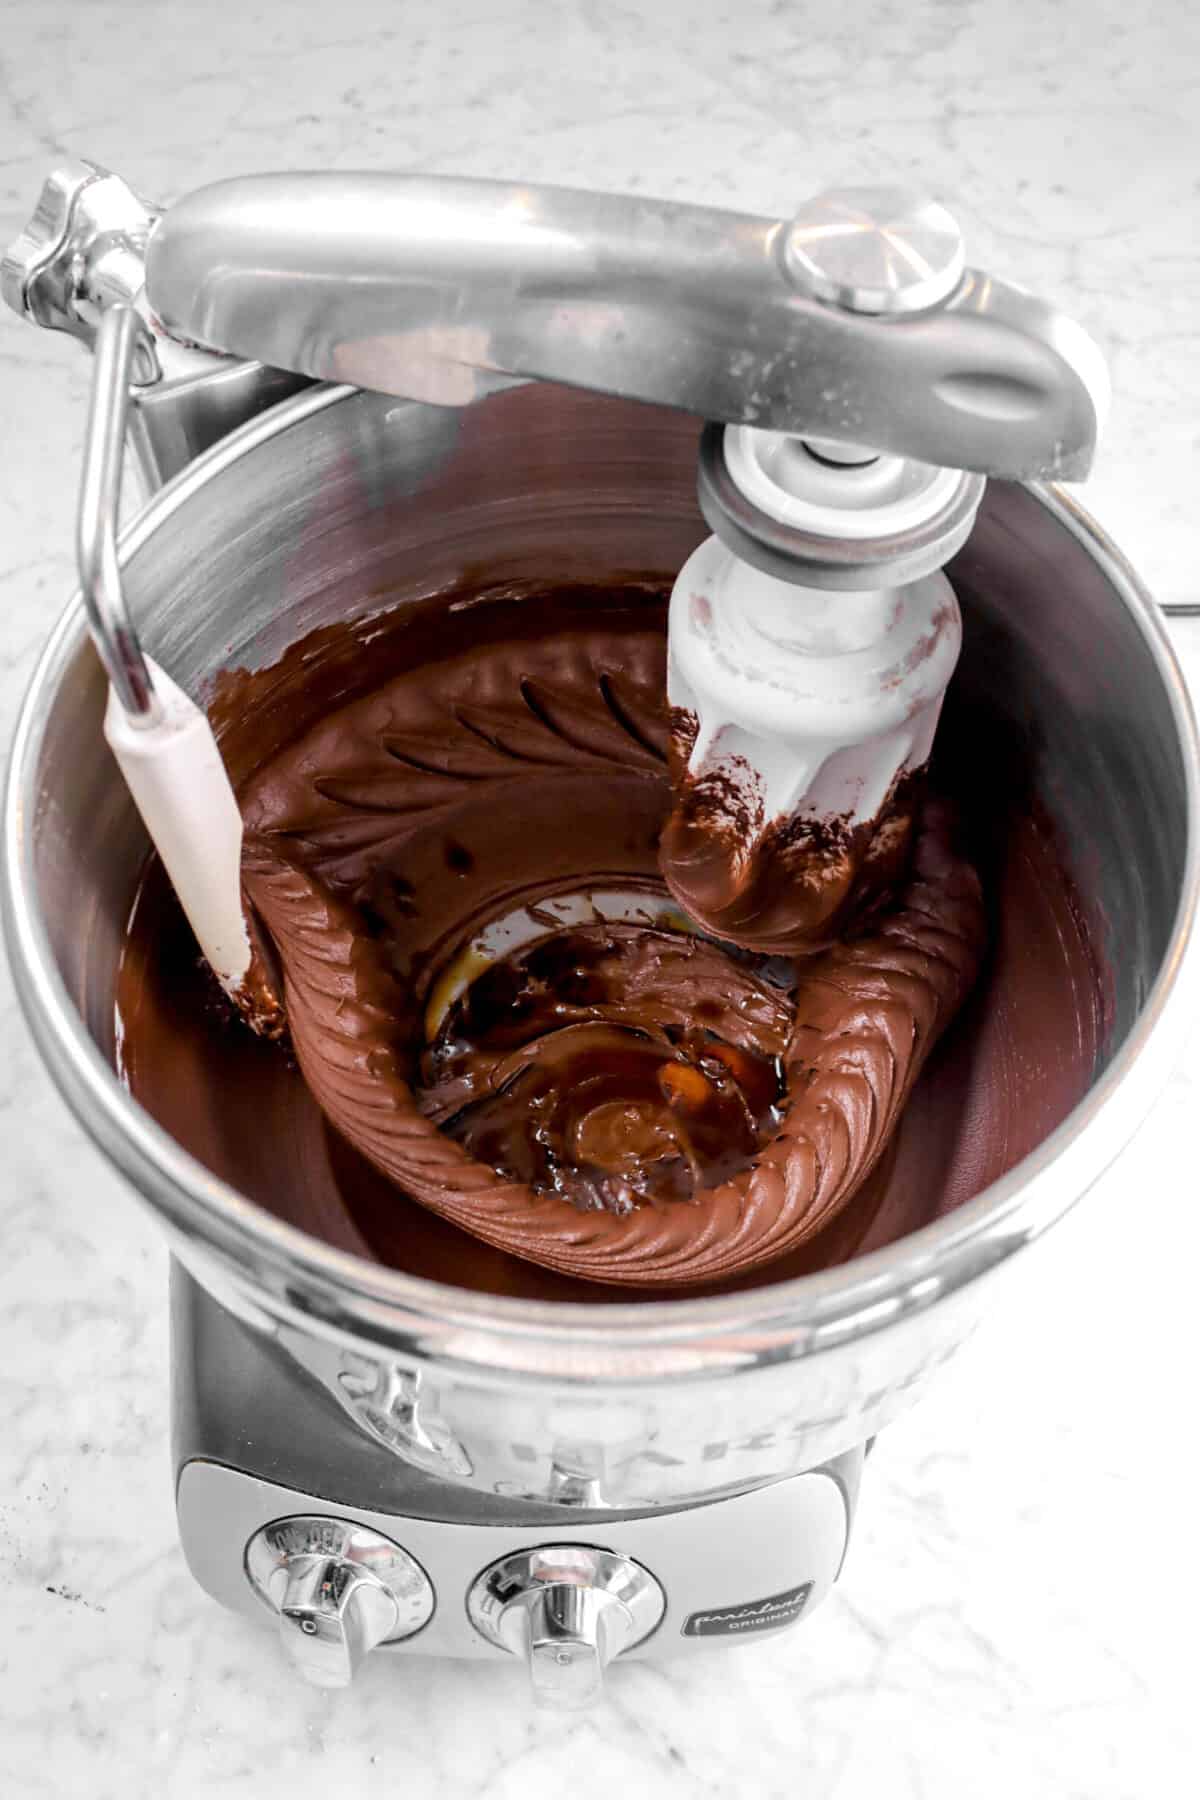 vanilla added to chocolate frosting